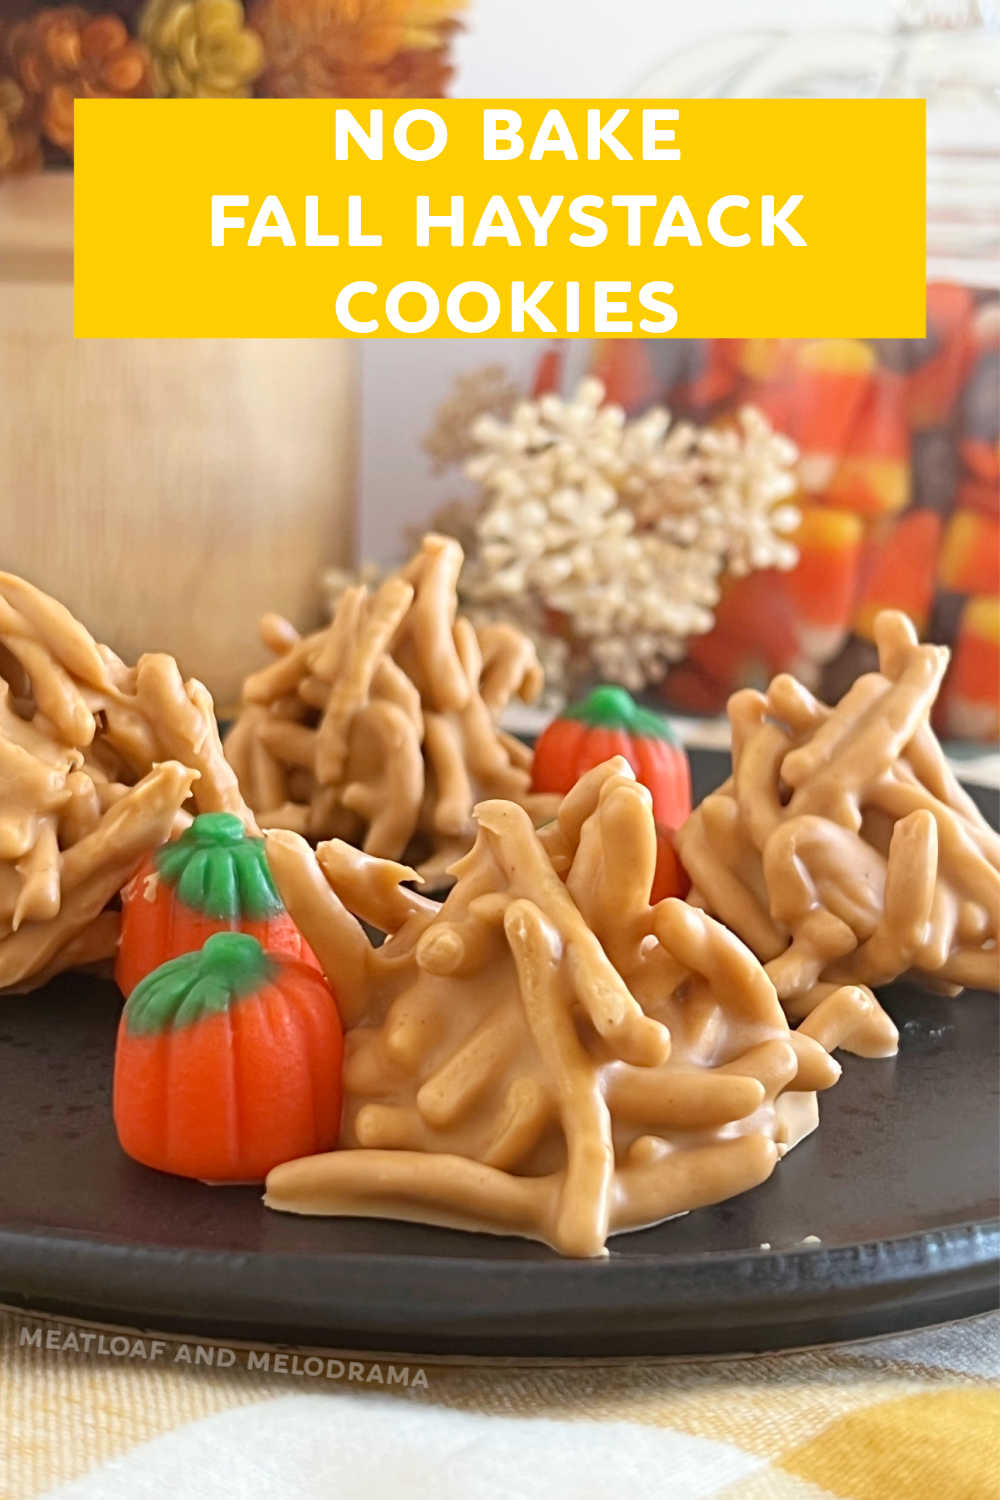 No Bake Haystack Cookies with chow mein noodles, peanut butter, butterscotch morsels and marshmallow pumpkins are a perfect sweet treat for fall. Everyone loves these easy butterscotch haystacks! via @meamel